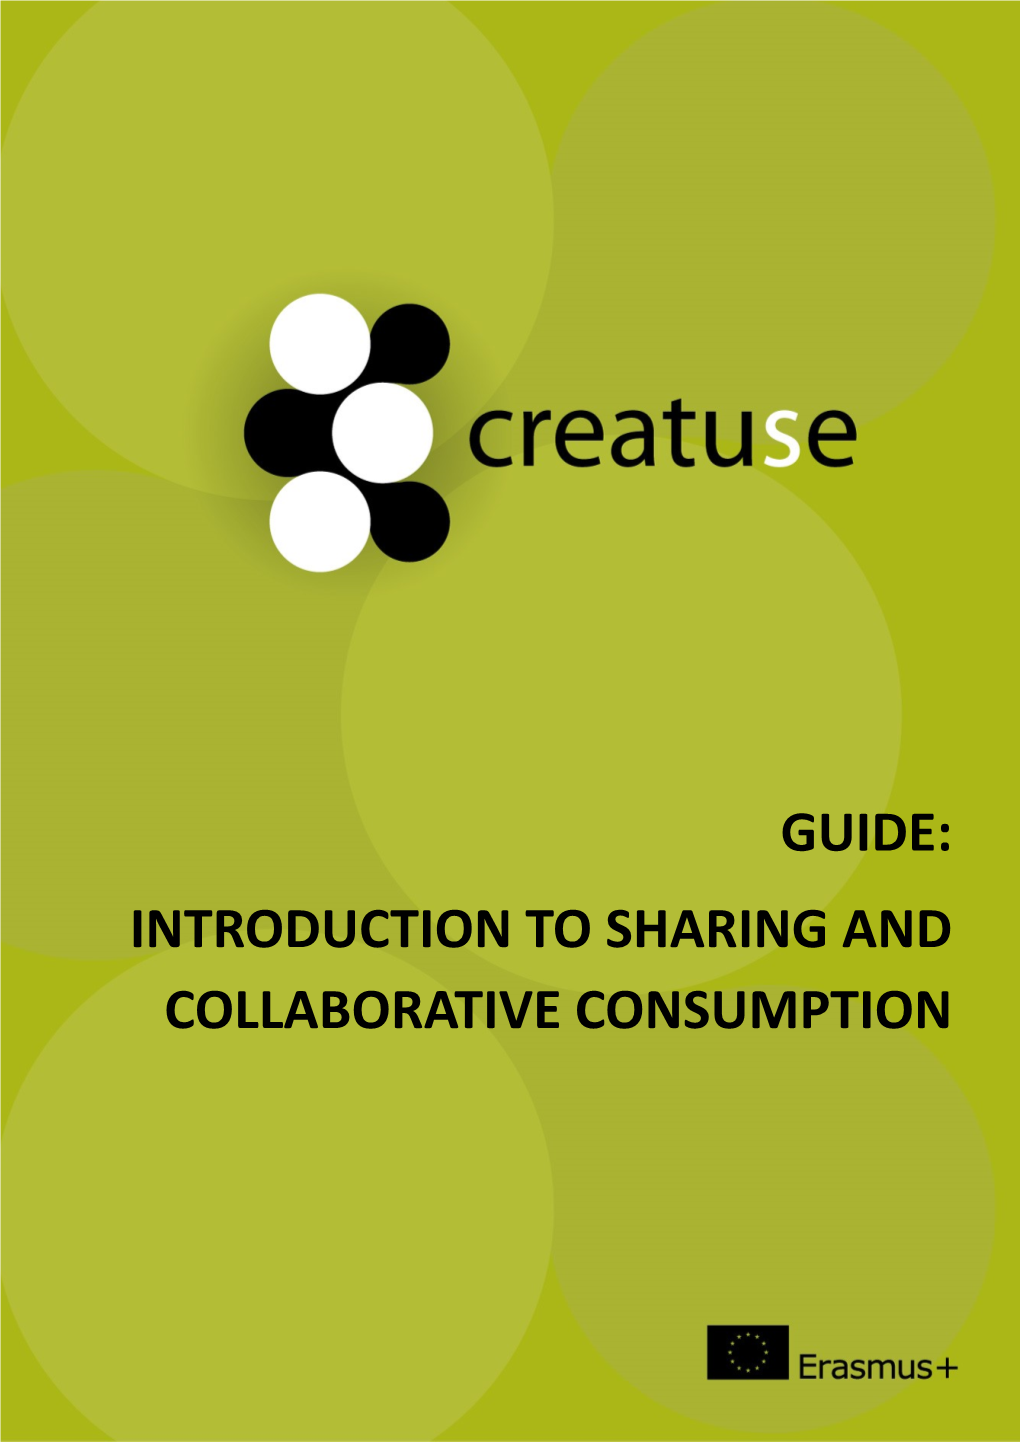 Guide: Introduction to Sharing and Collaborative Consumption